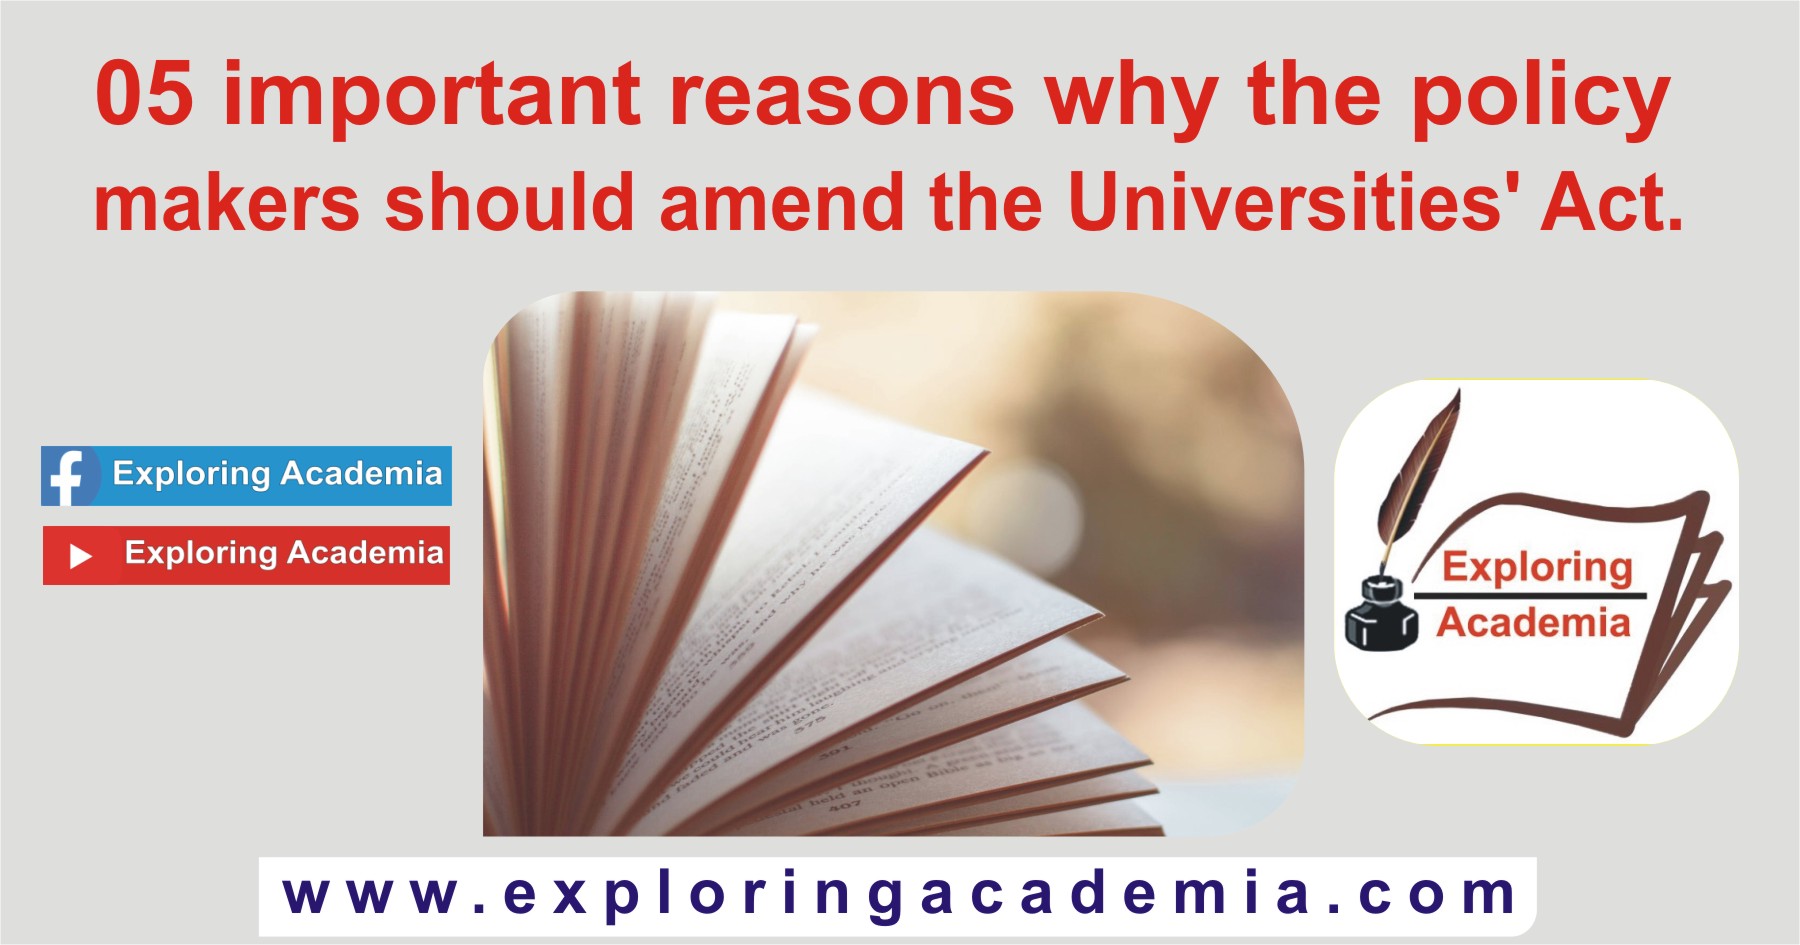 The 05 important reasons why policymakers should amend the Universities’ Act.